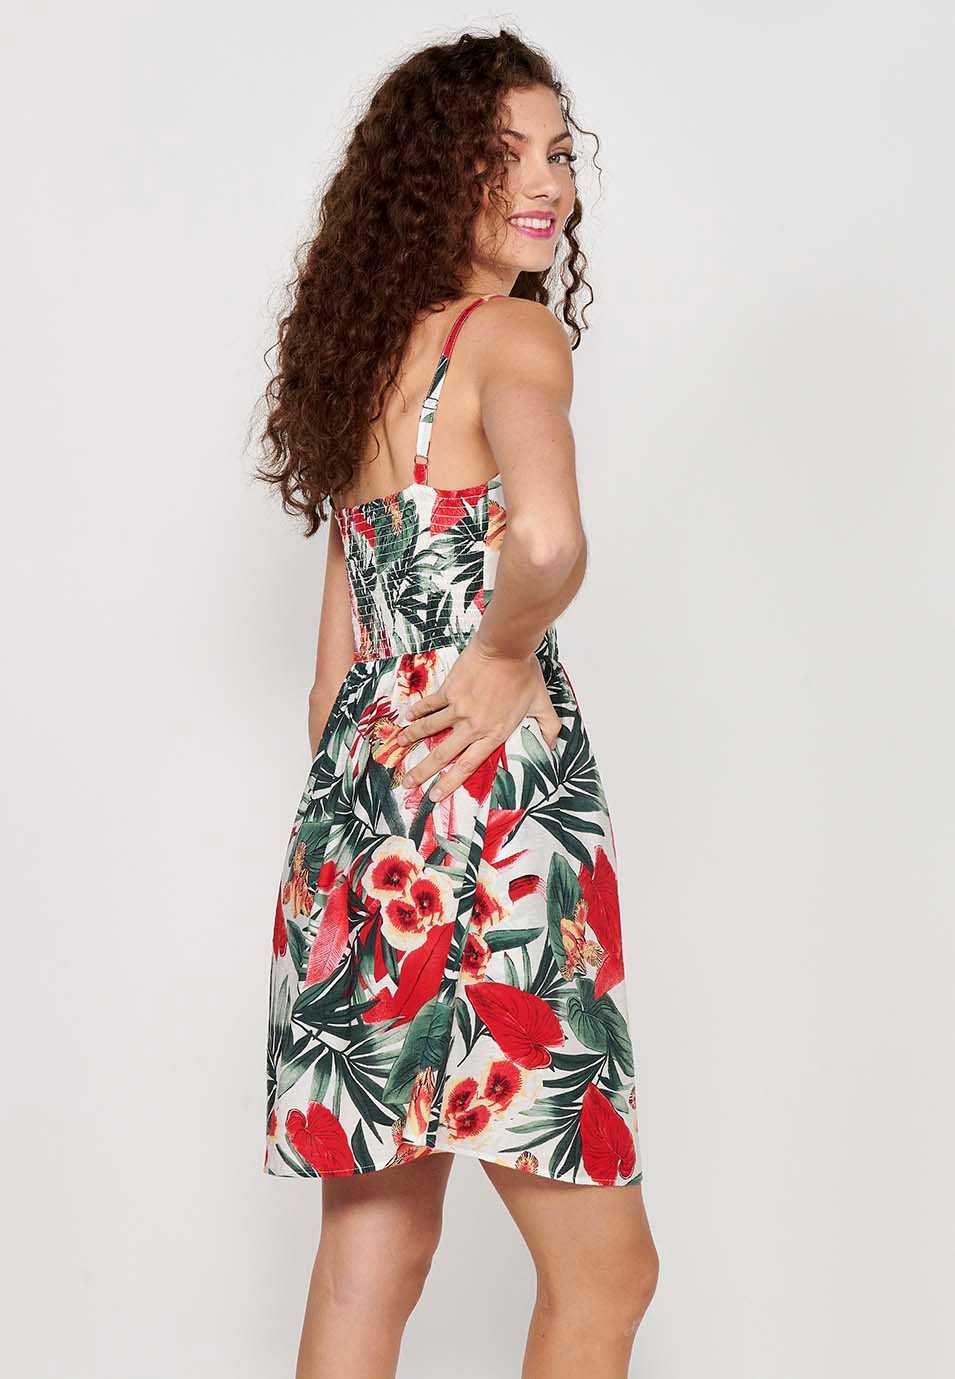 Women's Tropical Floral Print V-Neck Button Front Strap Dress with Rubberized Back Multicolor 4